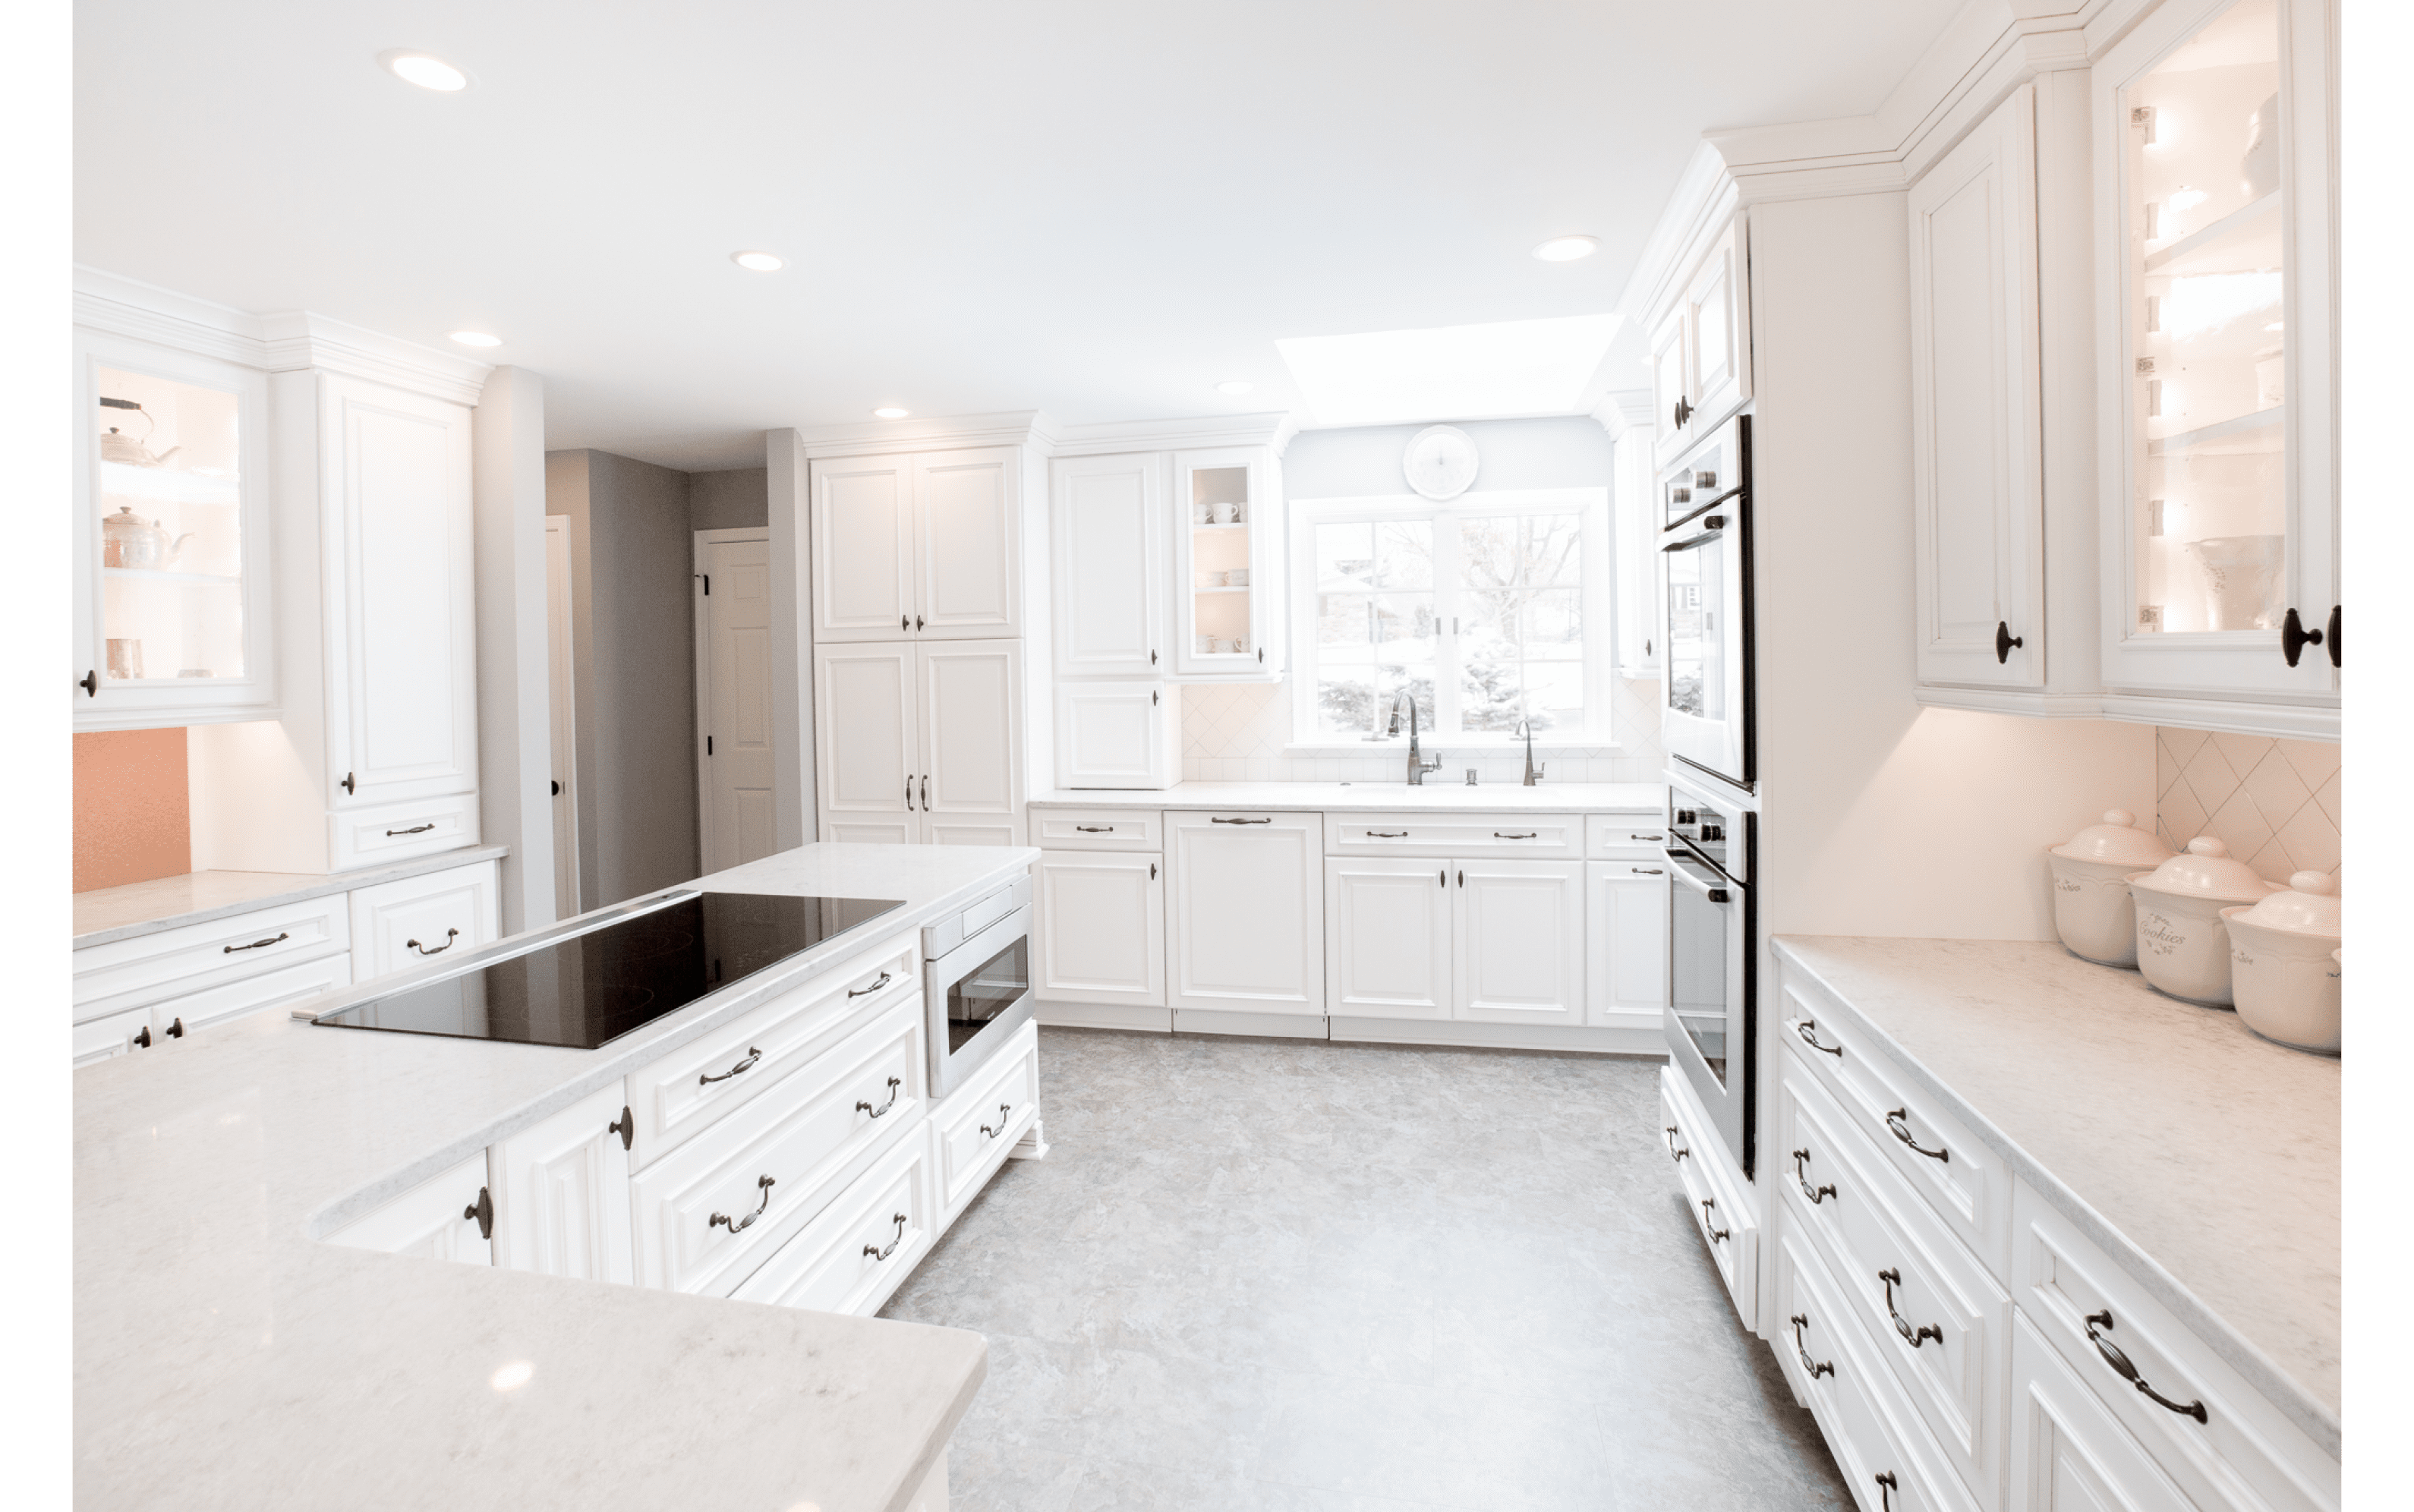 kitchen renovation with white cabinetry mixed glass doors black finishes recess lighting